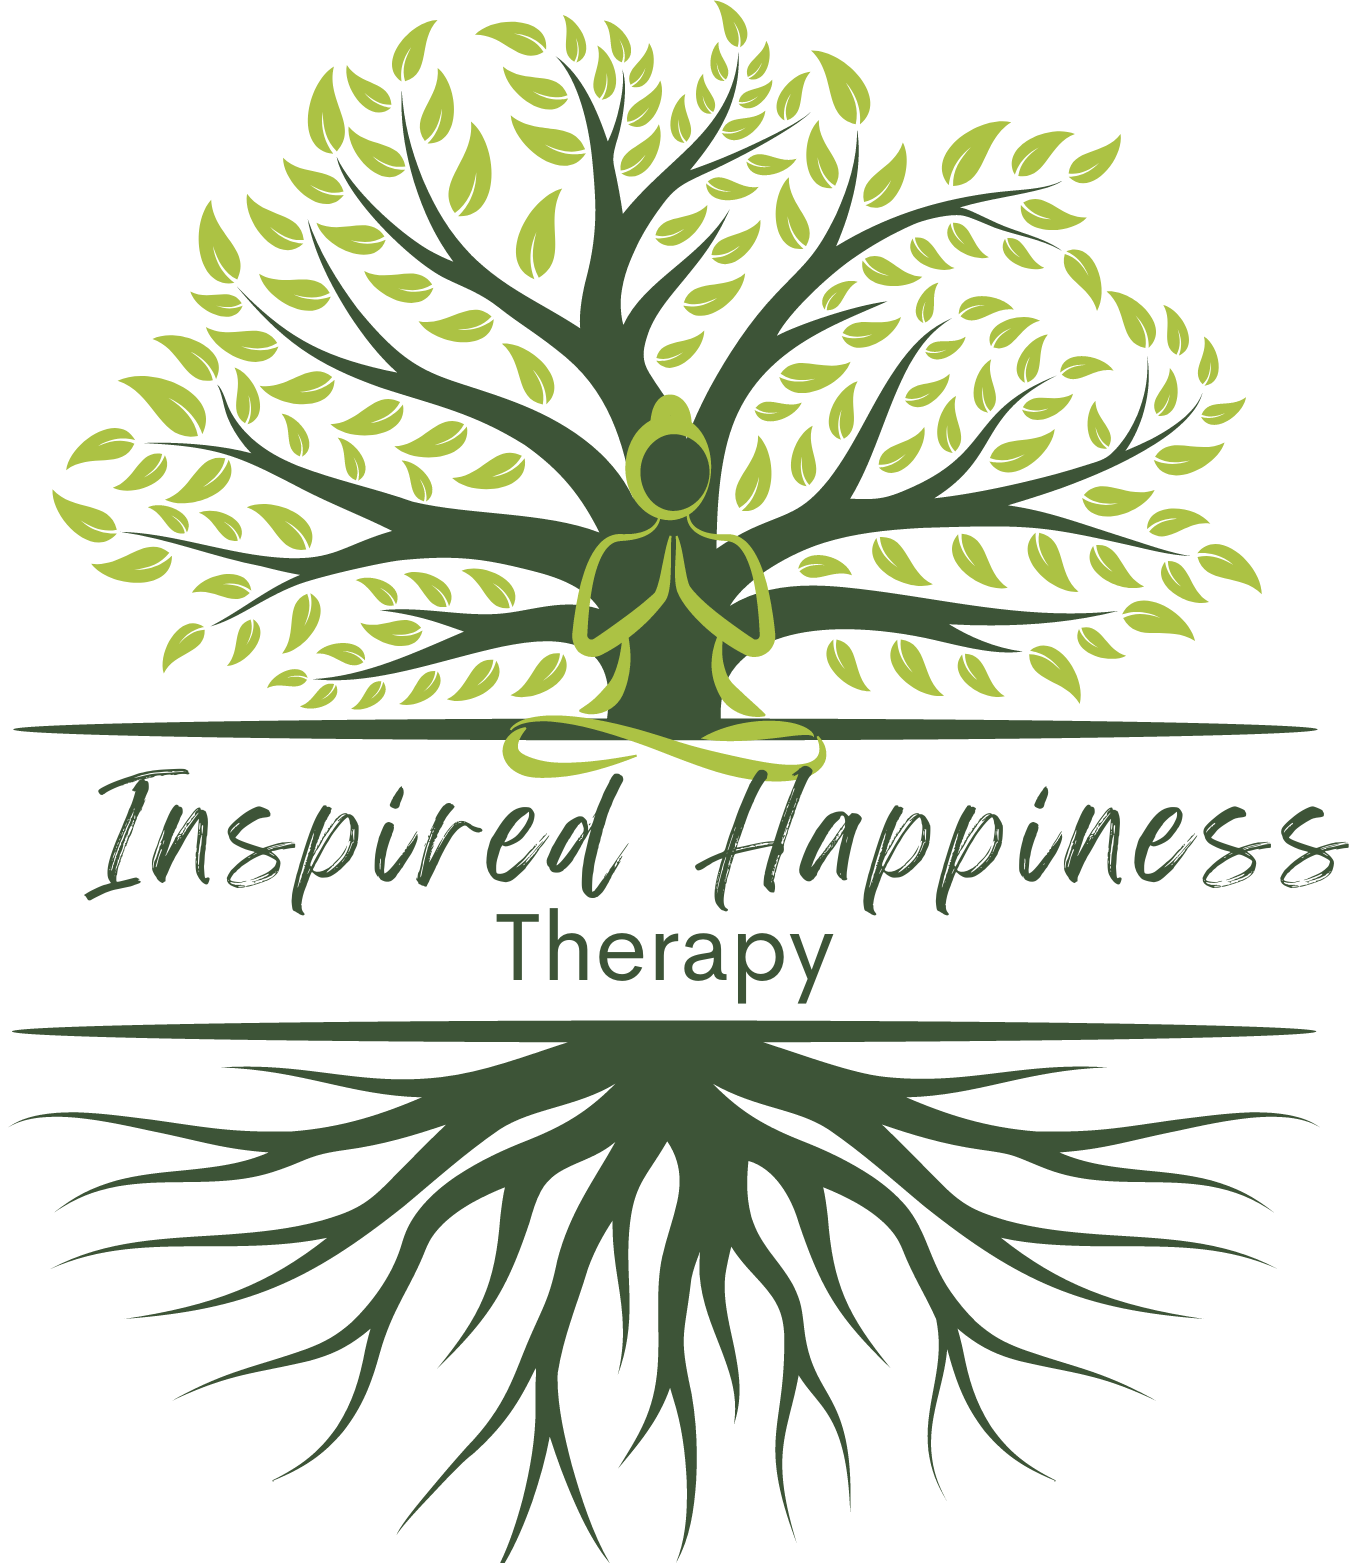 Inspired Happiness Therapy Ridgeland Mississippi Stacey Aldridge